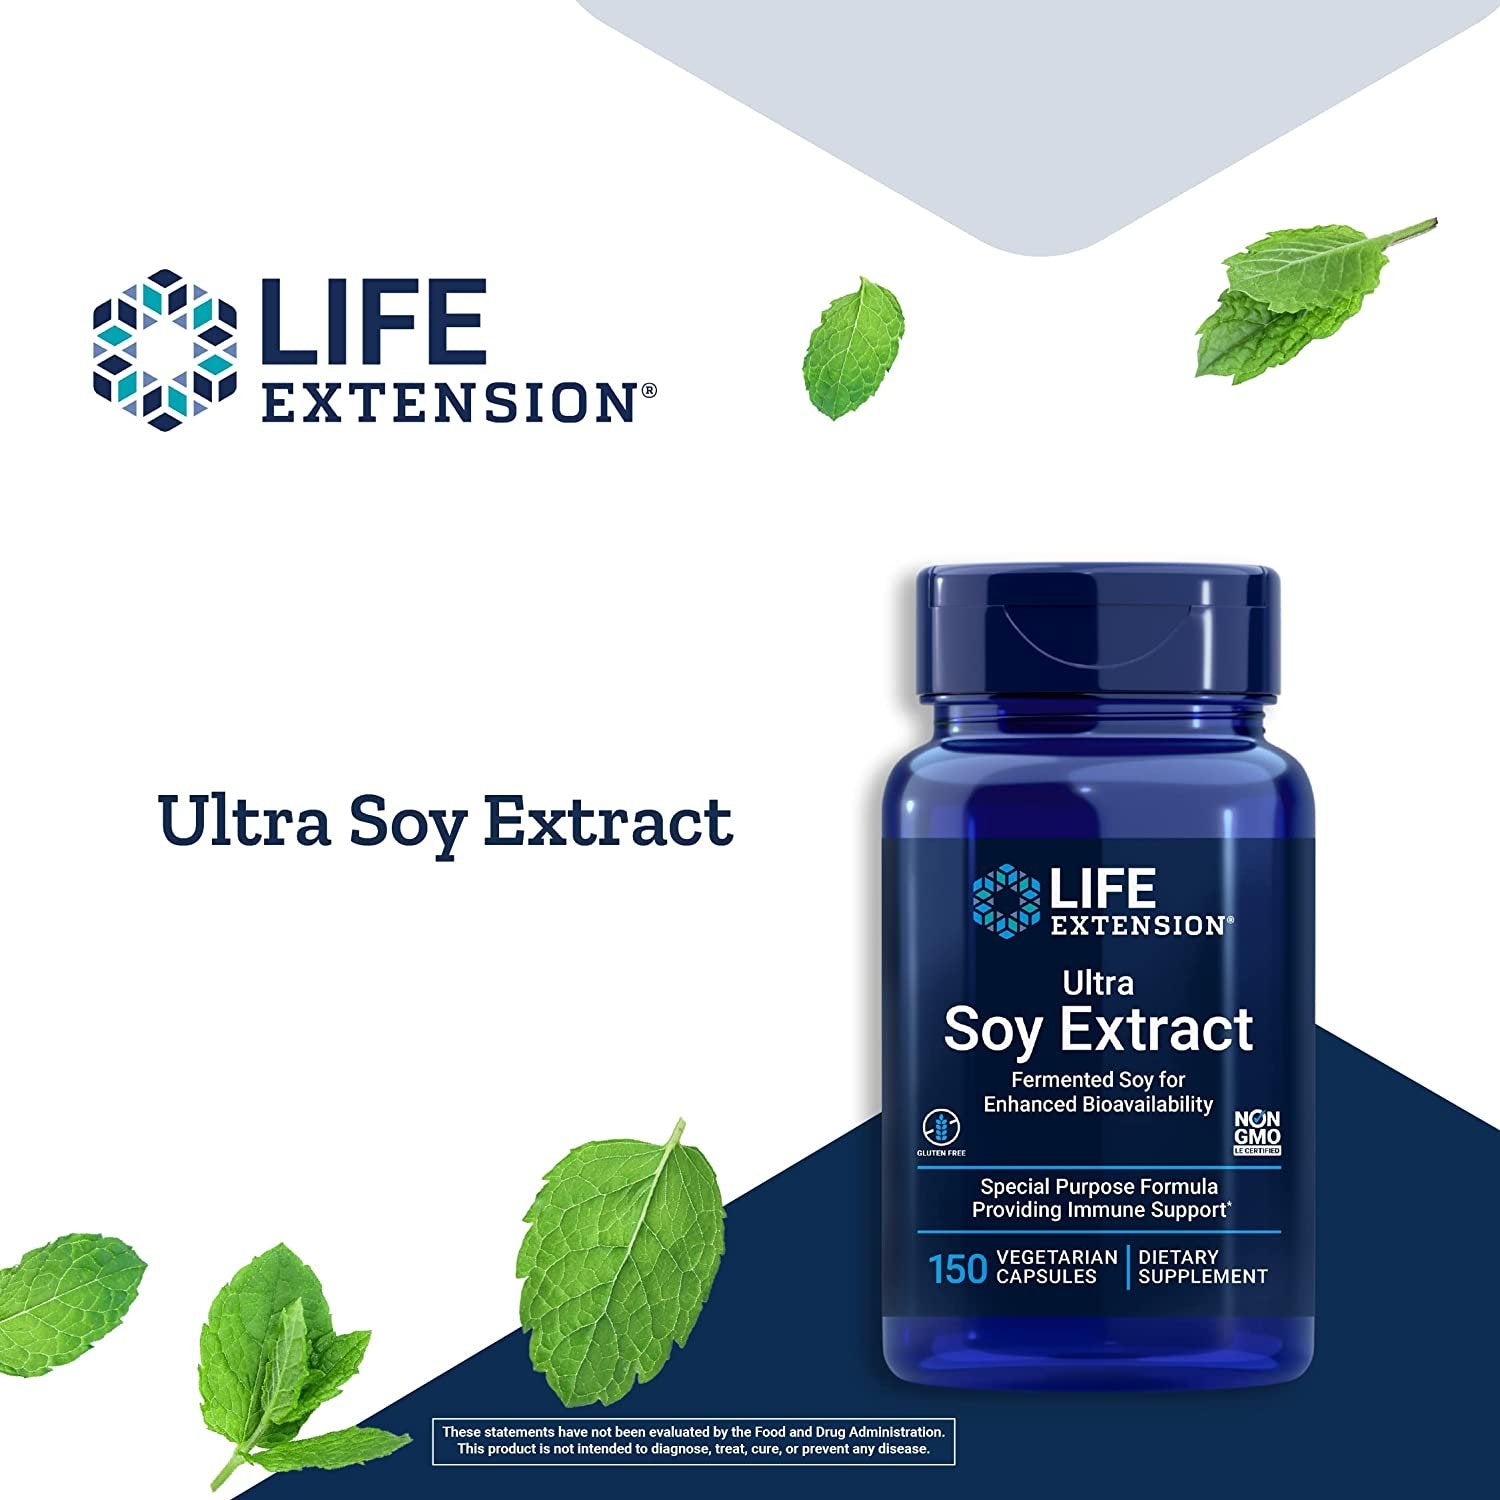 Life Extension Ultra Soy Extract - Soy Isoflavones Supplement for Women - Post Menopause Bone and Heart Health Support Fermented Soy Formula – Non-GMO, Gluten Free, Vegetarian – 150 Capsules